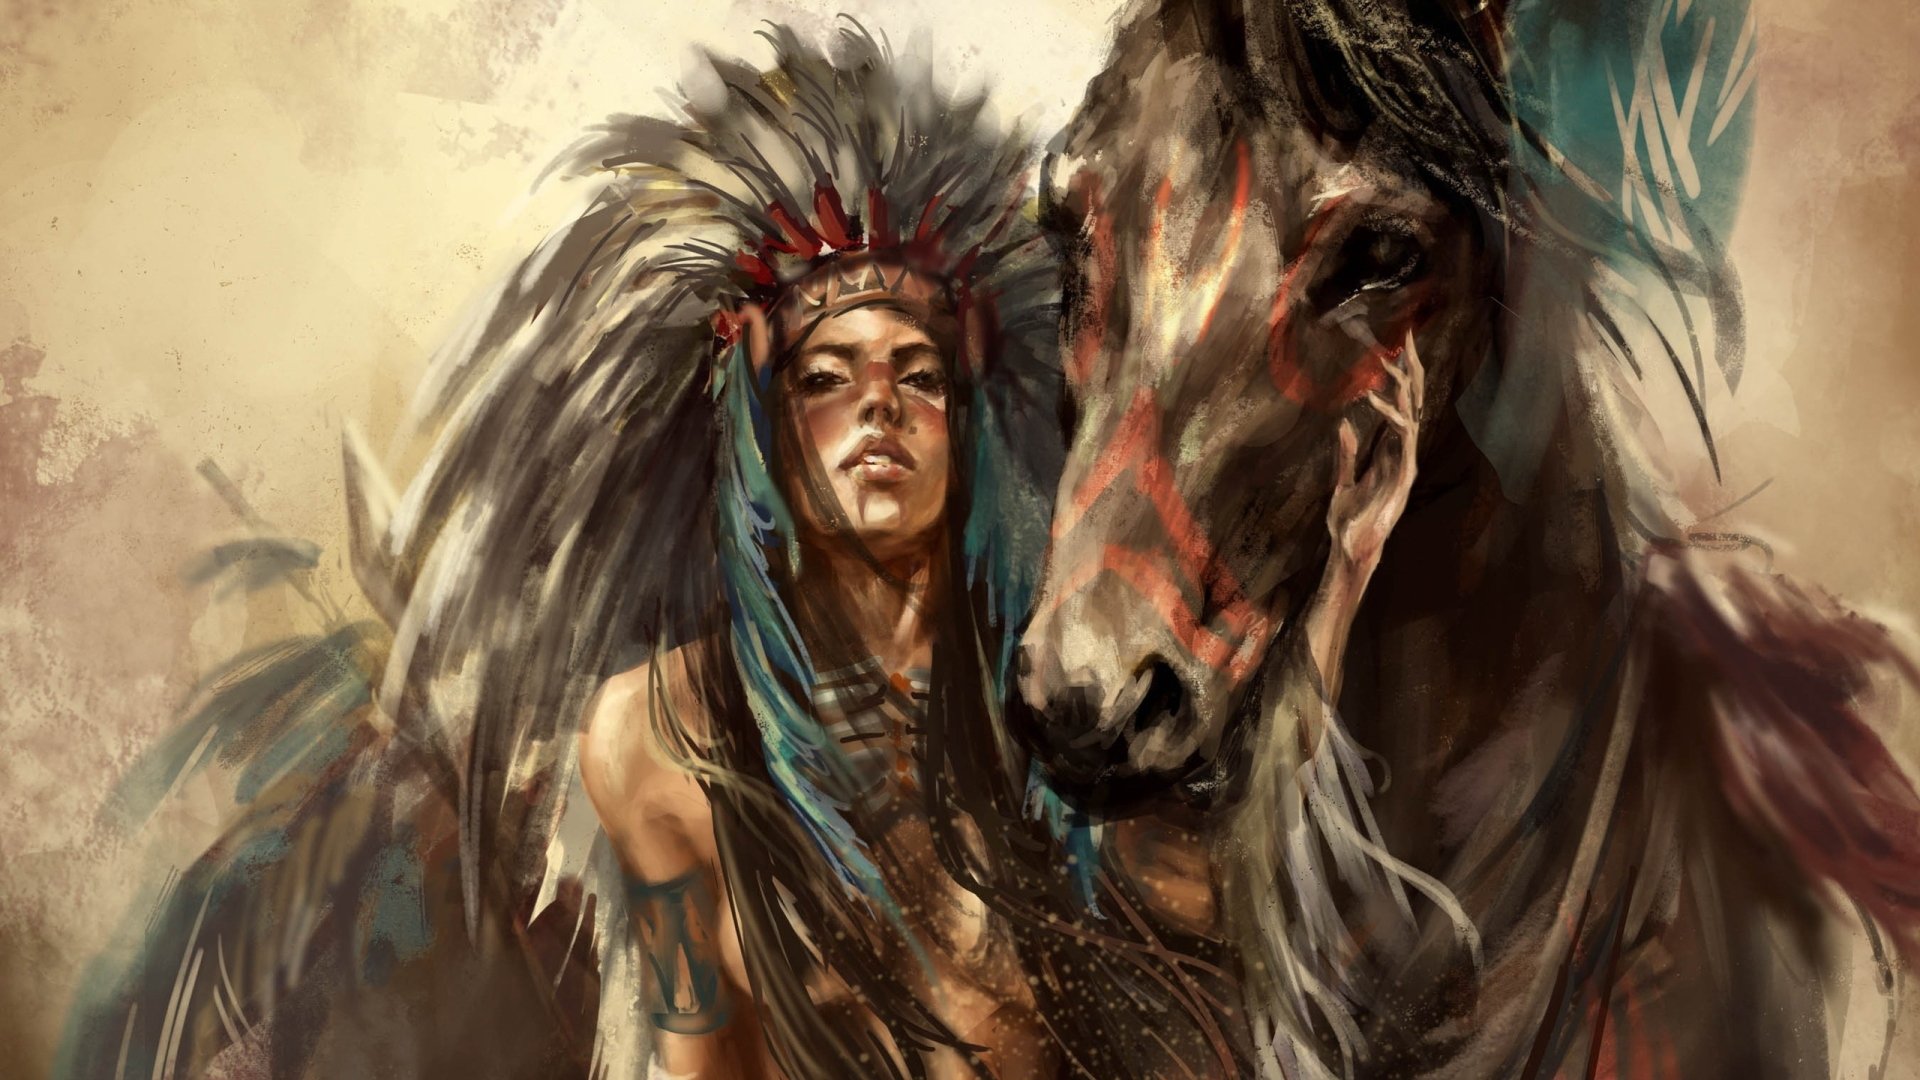 Artistic native american hd papers and backgrounds